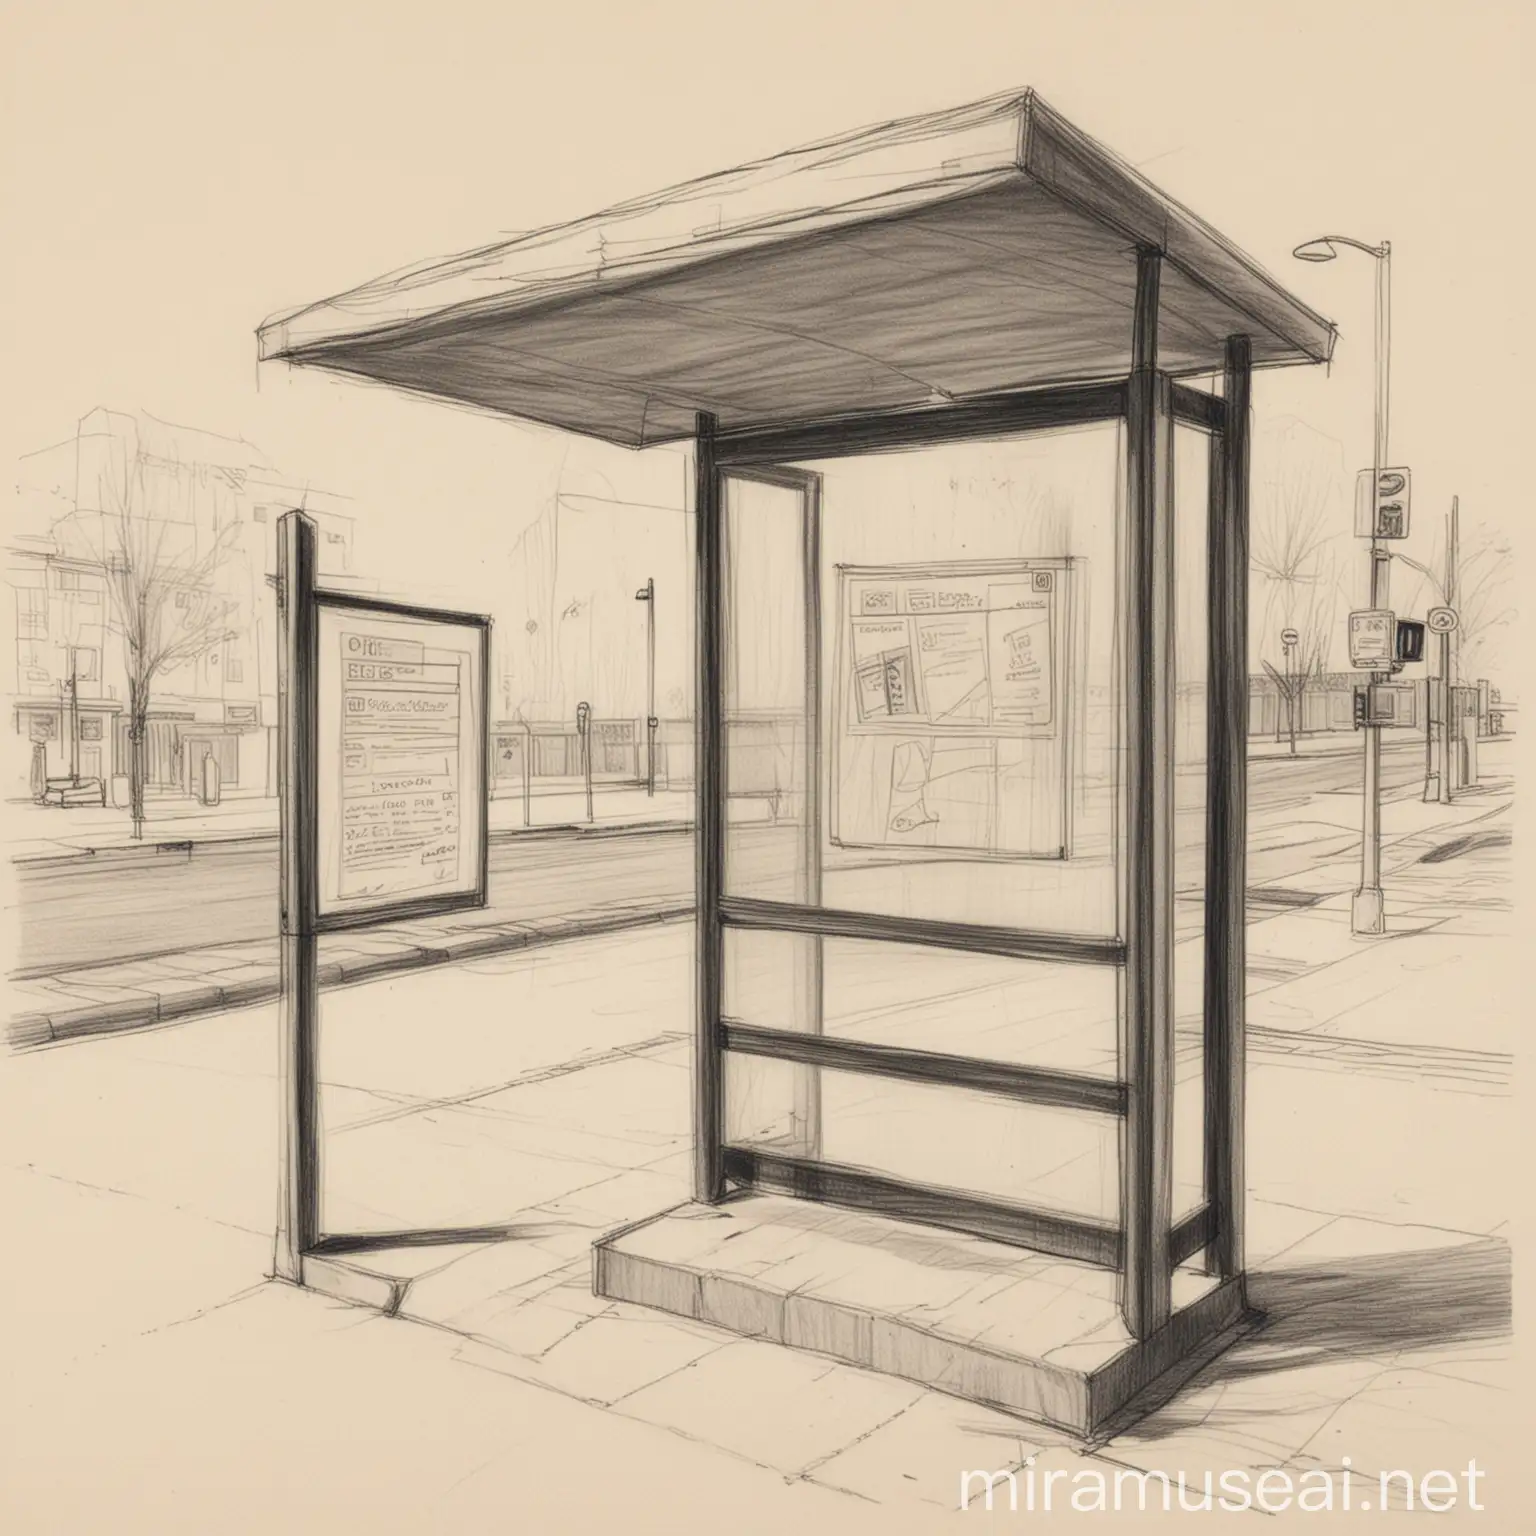 Front View Sketch of Bus Stop with Ad Box in Pencil